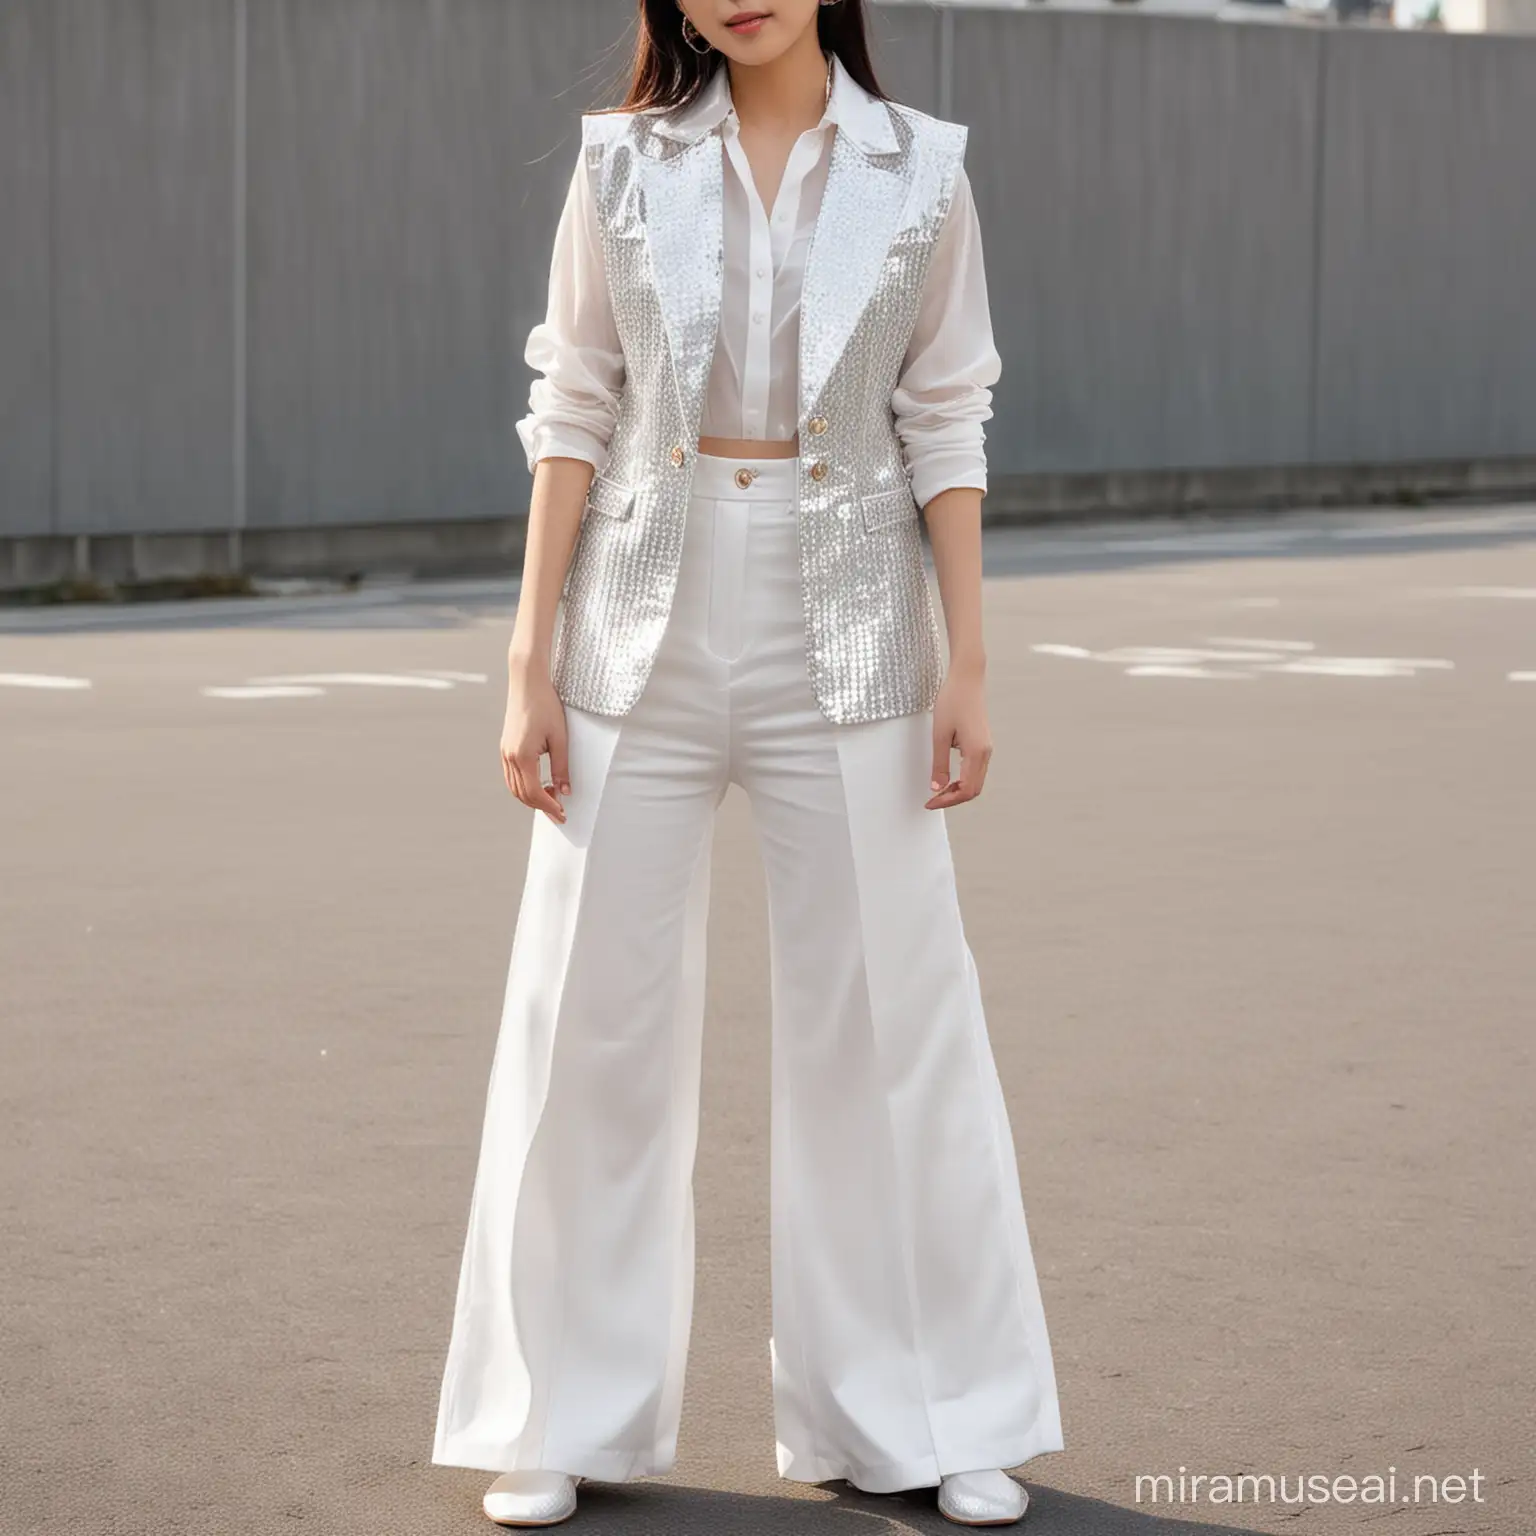 A Japanese girl wears a sparkling white long-arm vest and white flared pants